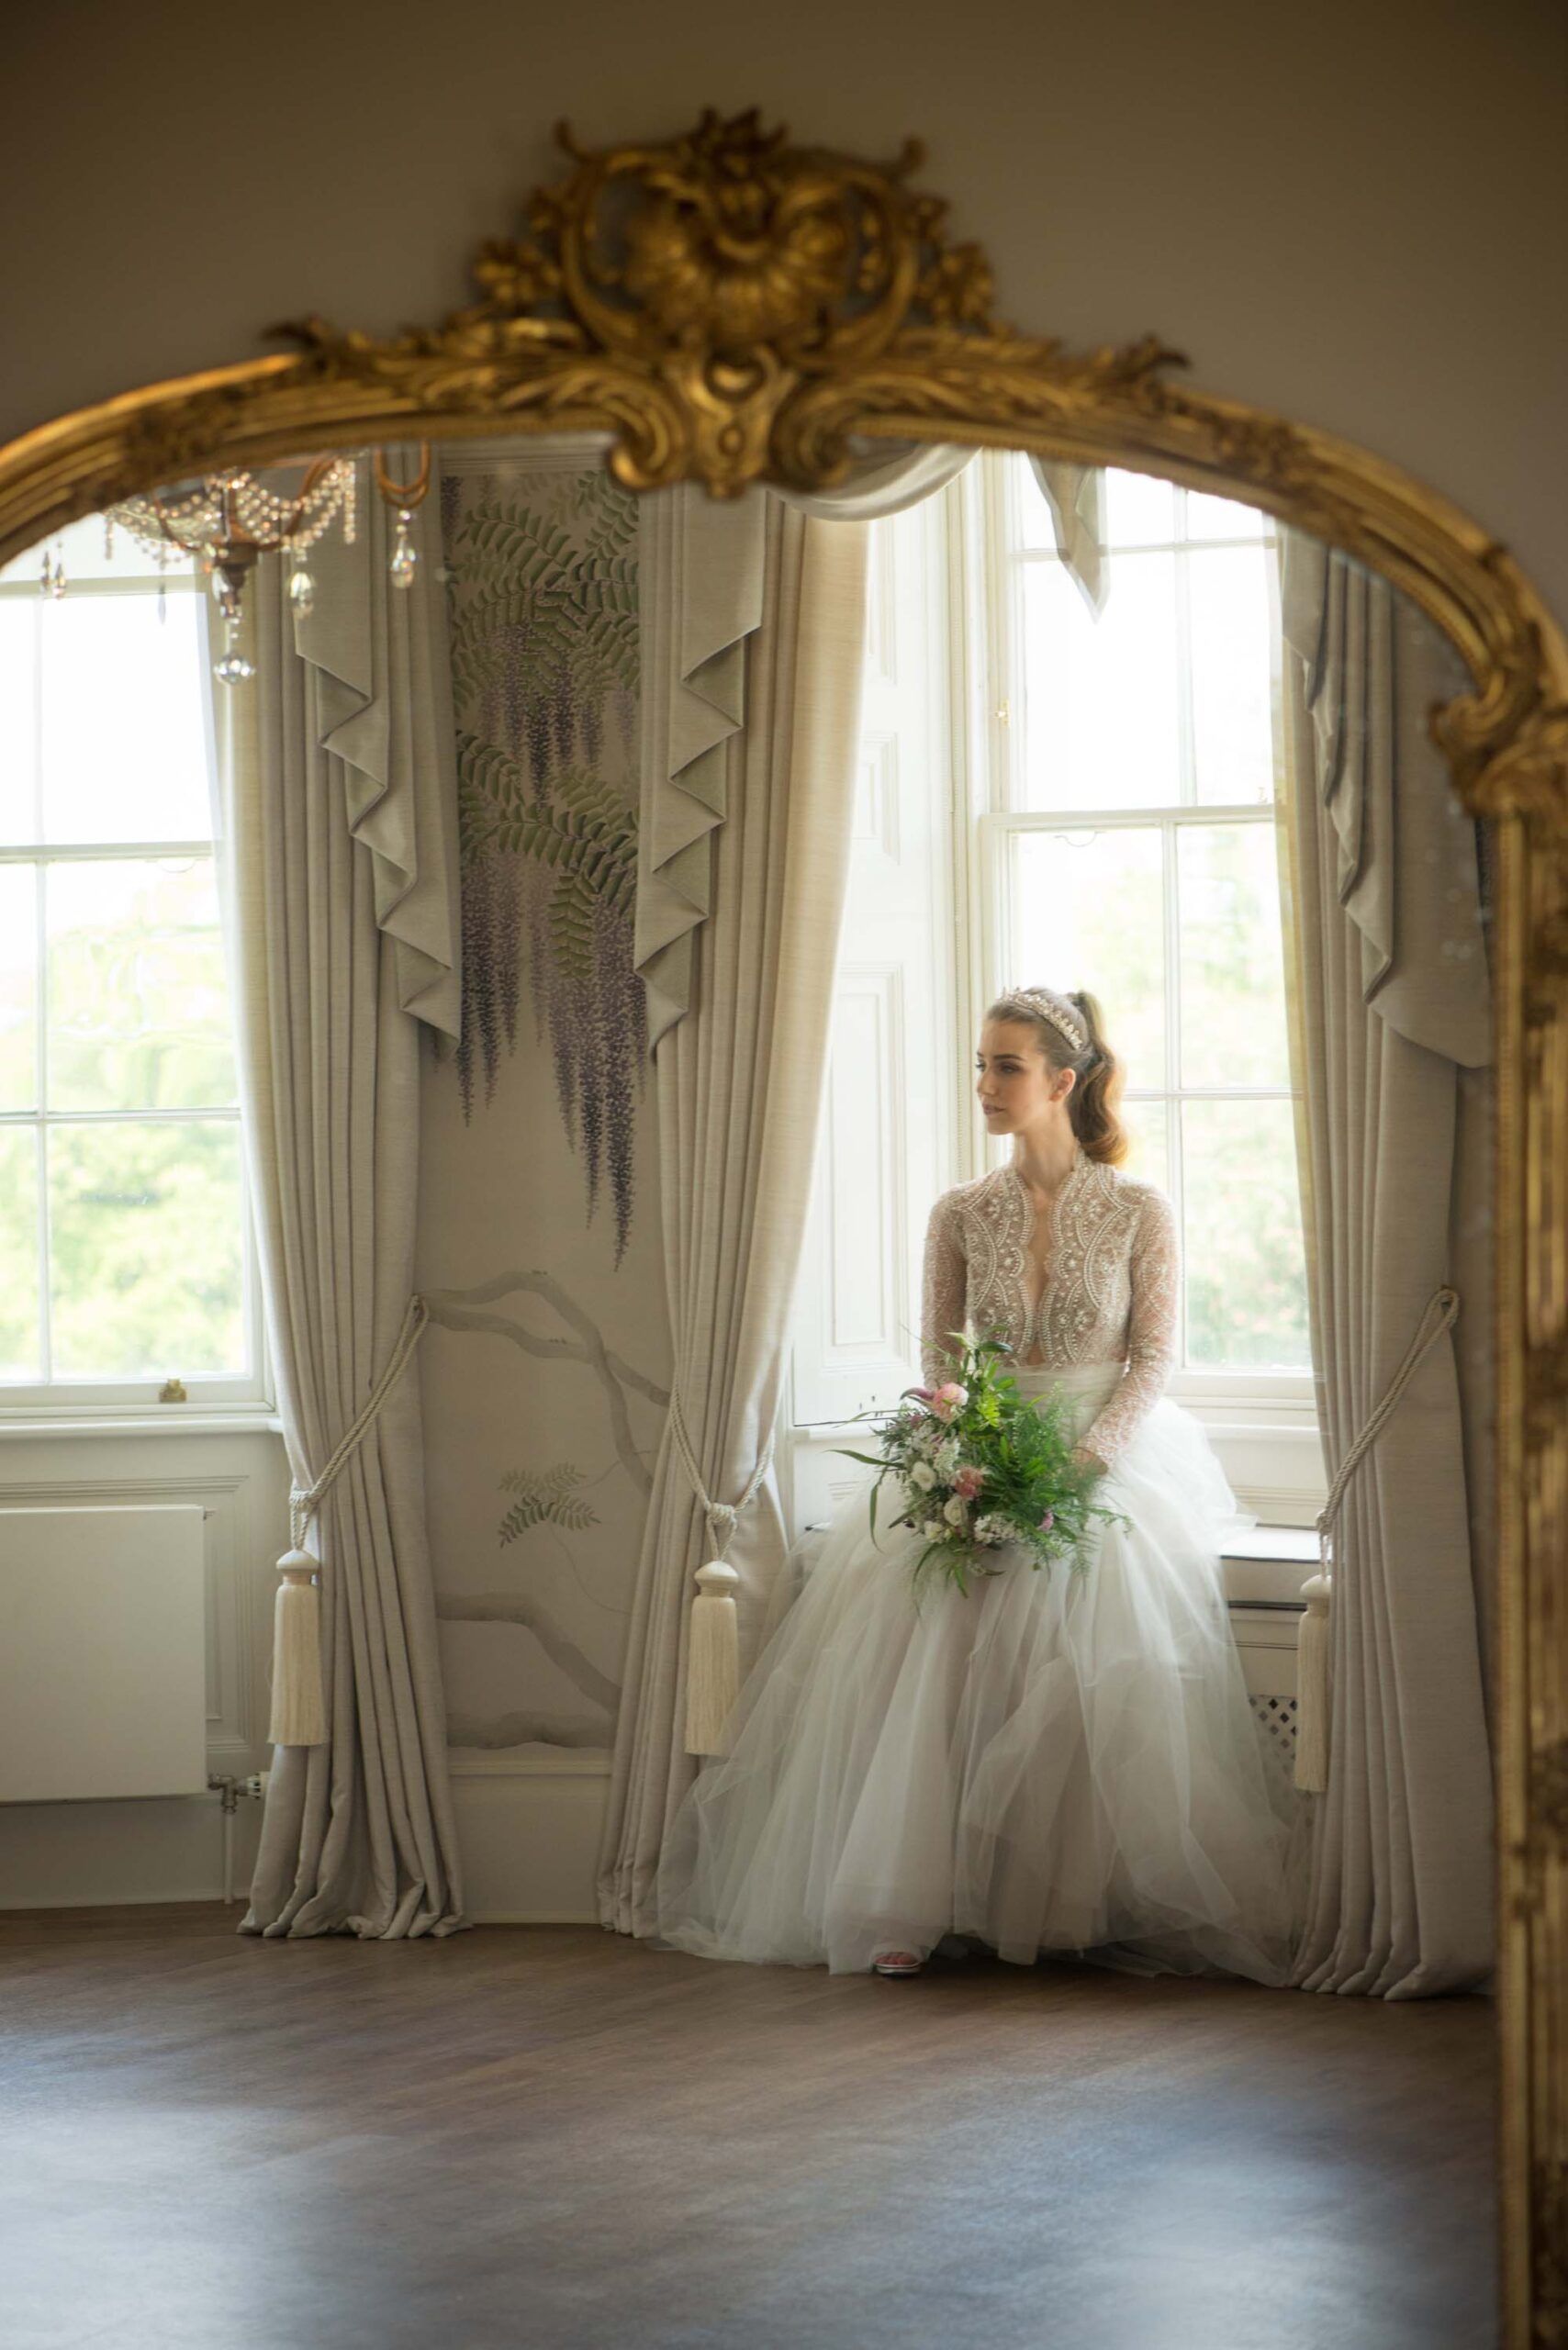 Hylands Estate country house wedding inspiration with Elegante by Michelle J, images by Claudine Hartzel Photography